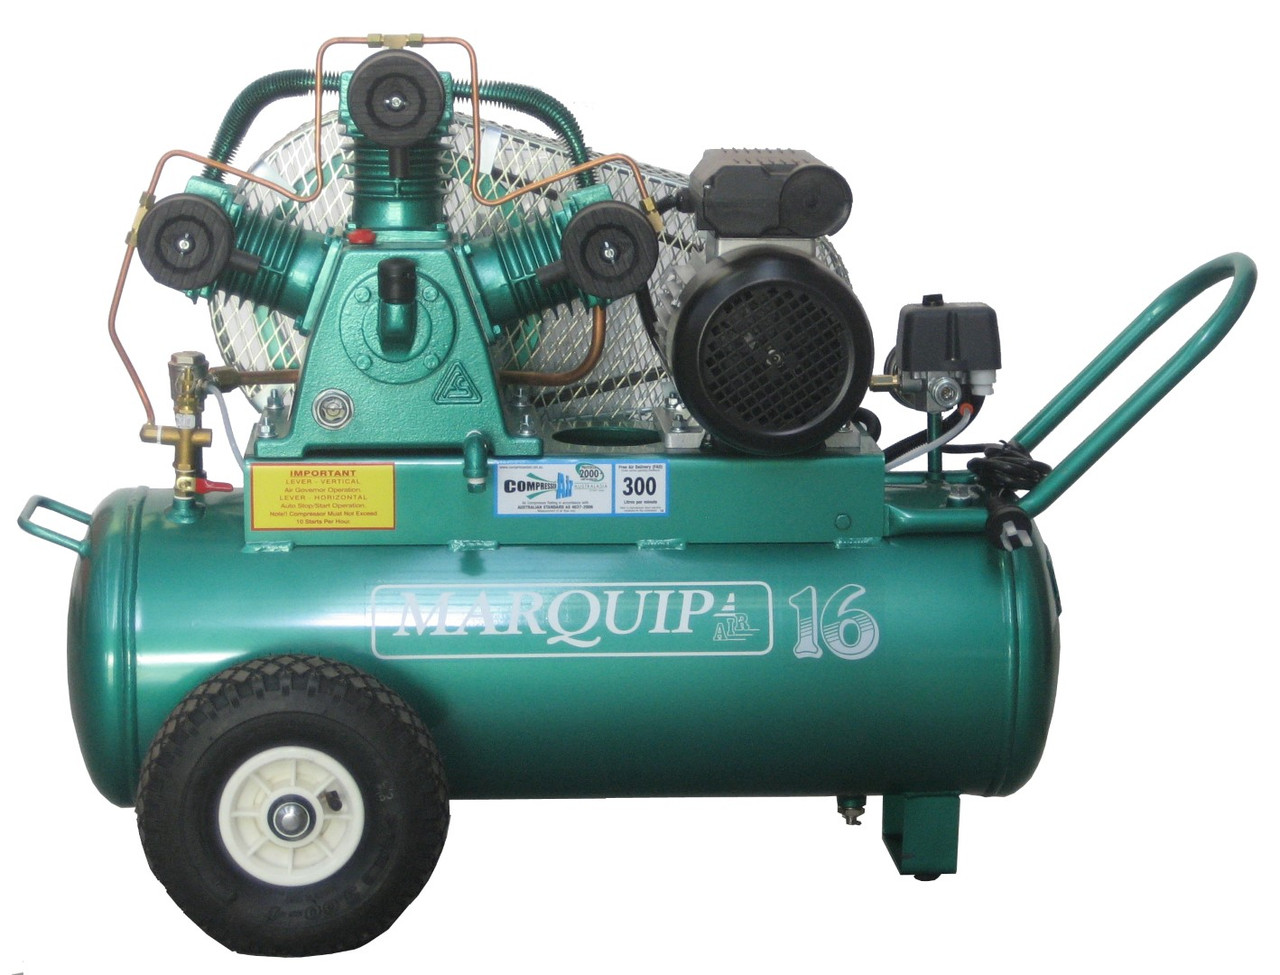 Marquip Single Phase Series Compressor 2kW 50Lt with Pneumatic Wheels